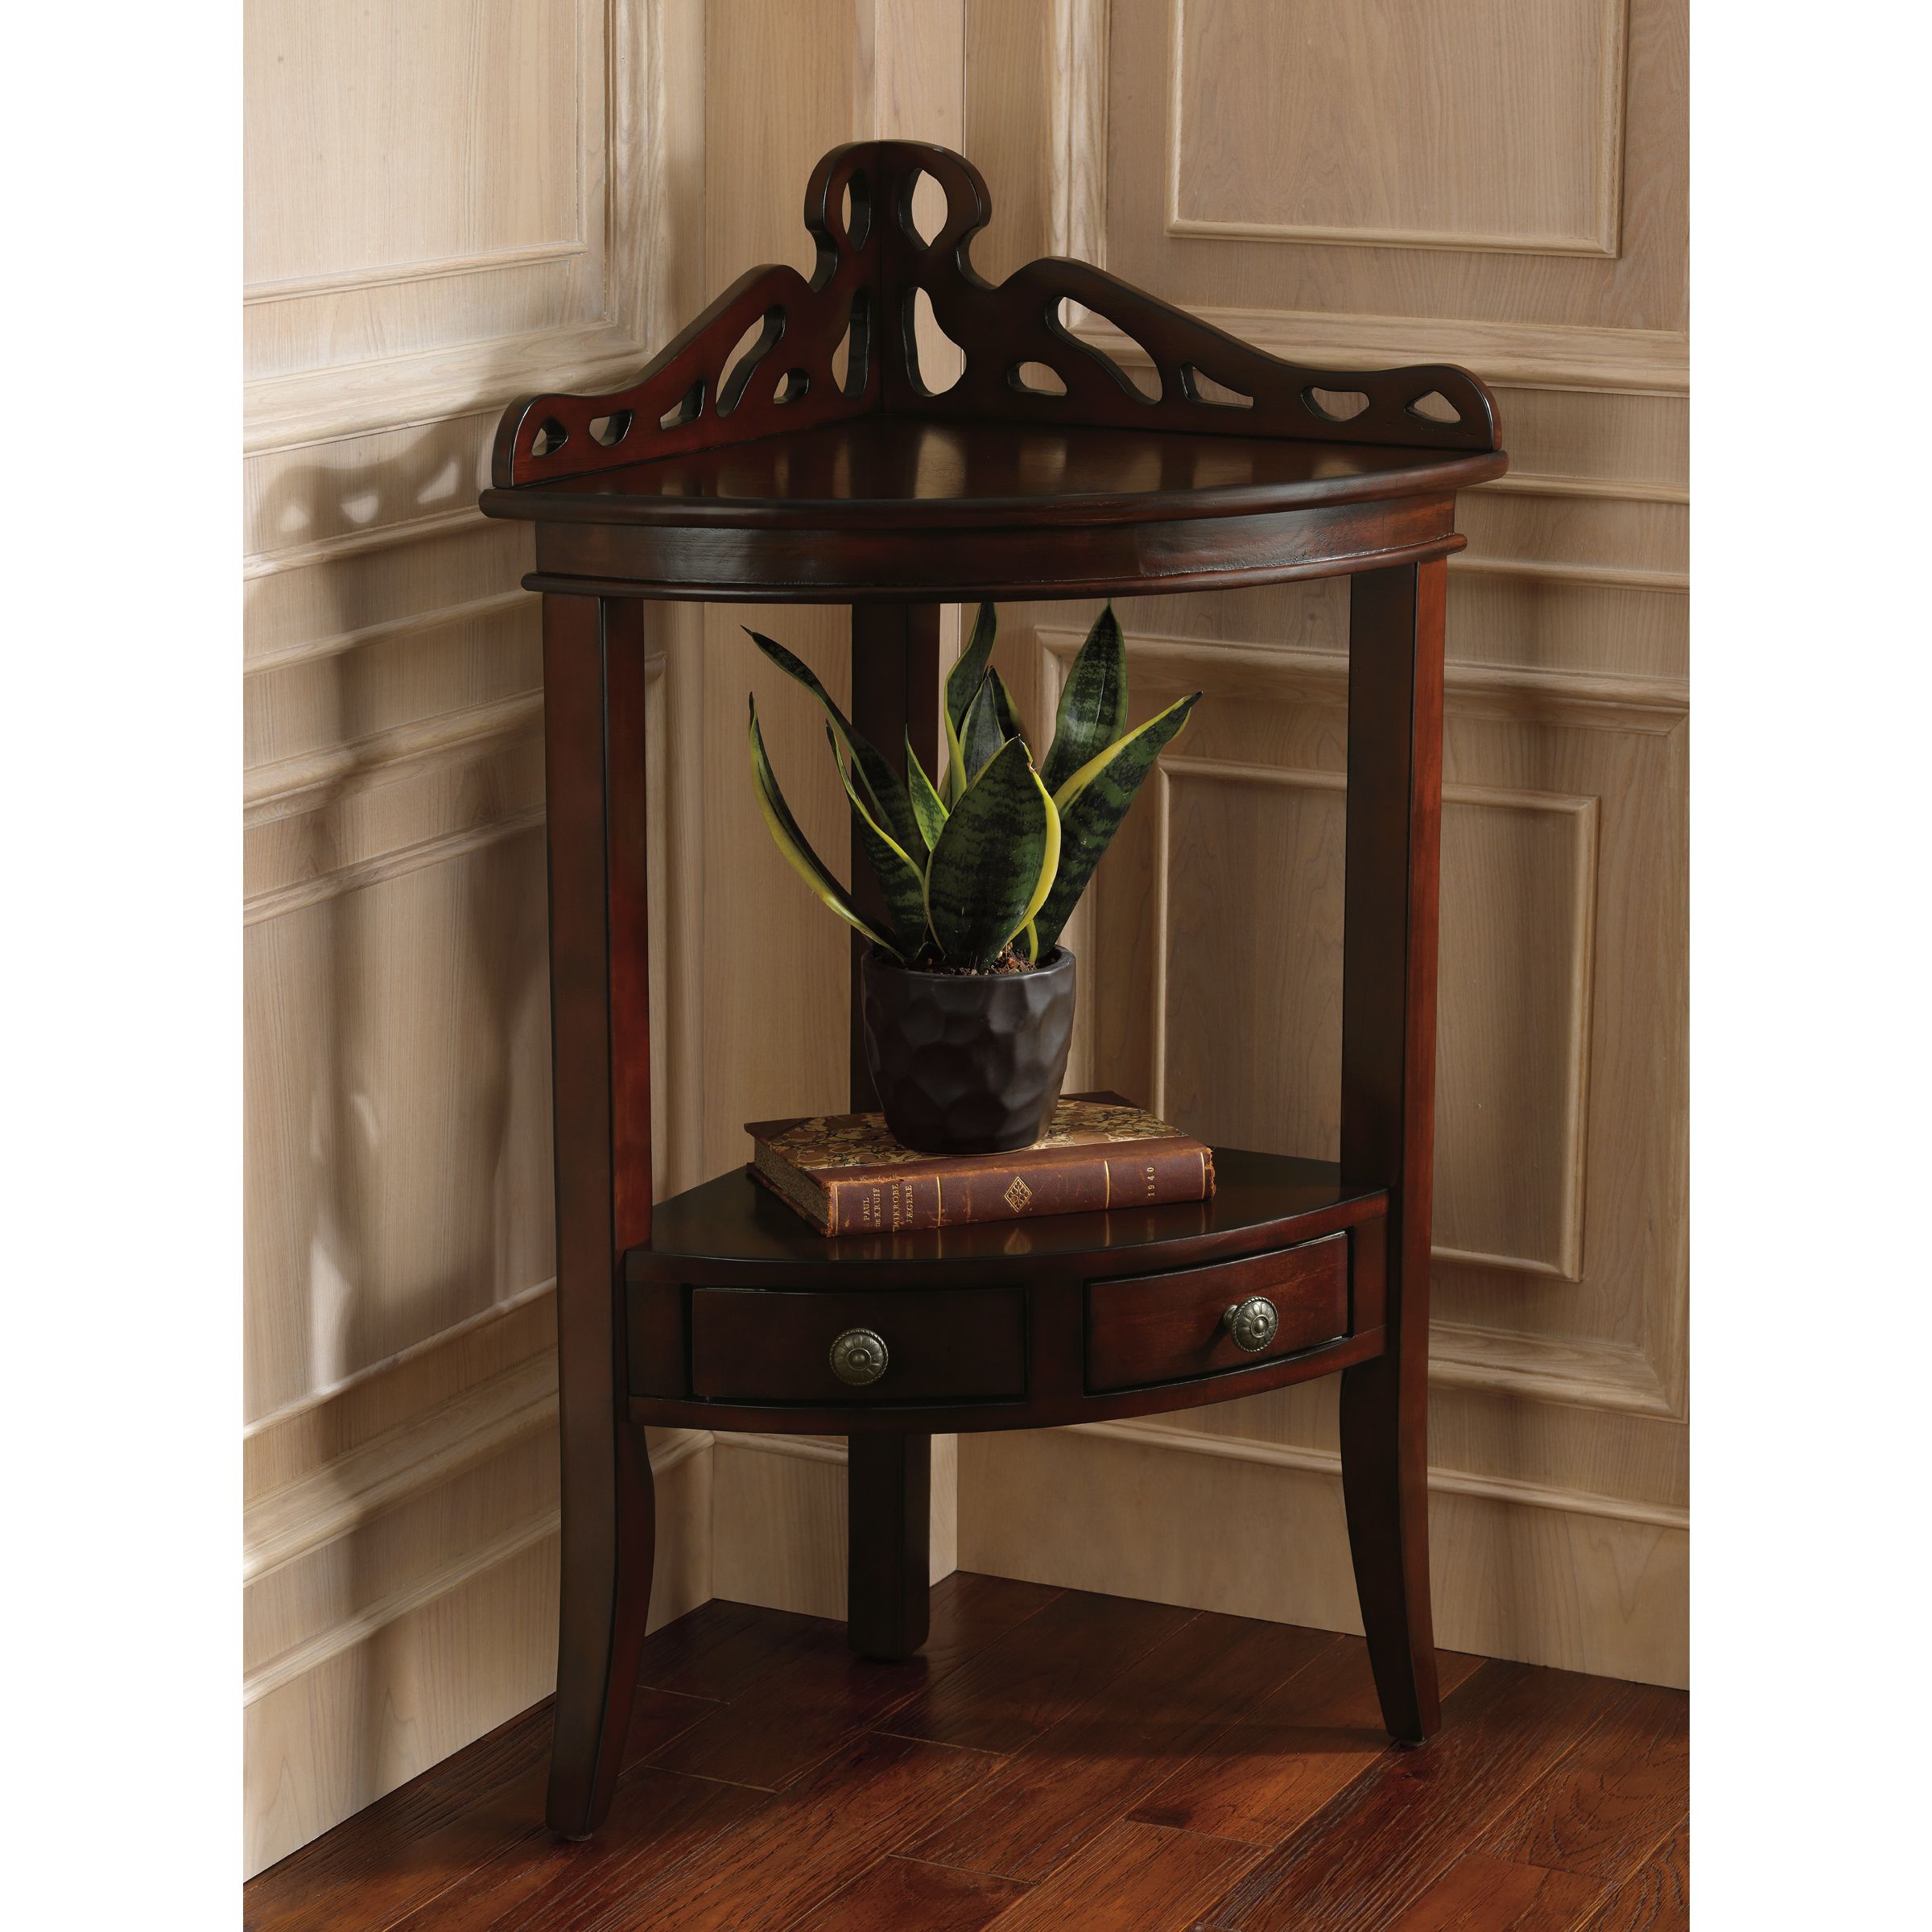 the grace corner accent table perfect piece fit elegantly with storage into your entry hall living room bedroom sits flush steel coffee legs small wall simple runner patterns mini